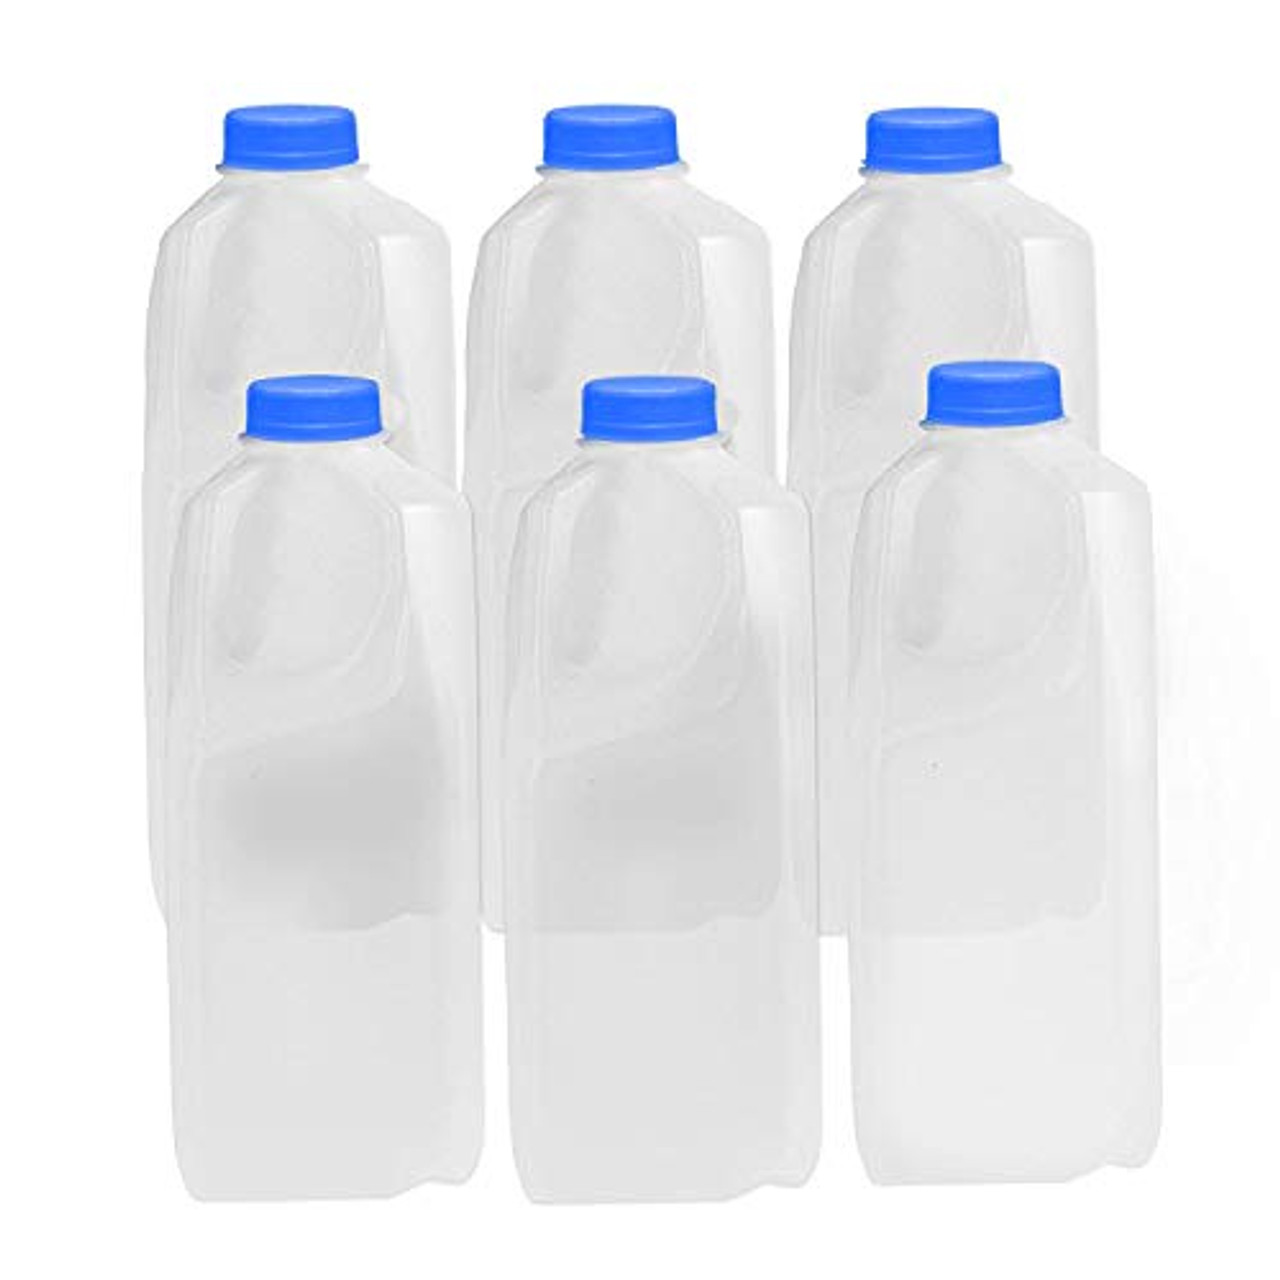 Stock Your Home 8 oz. Empty Plastic Juice Bottles with Caps -12 pack